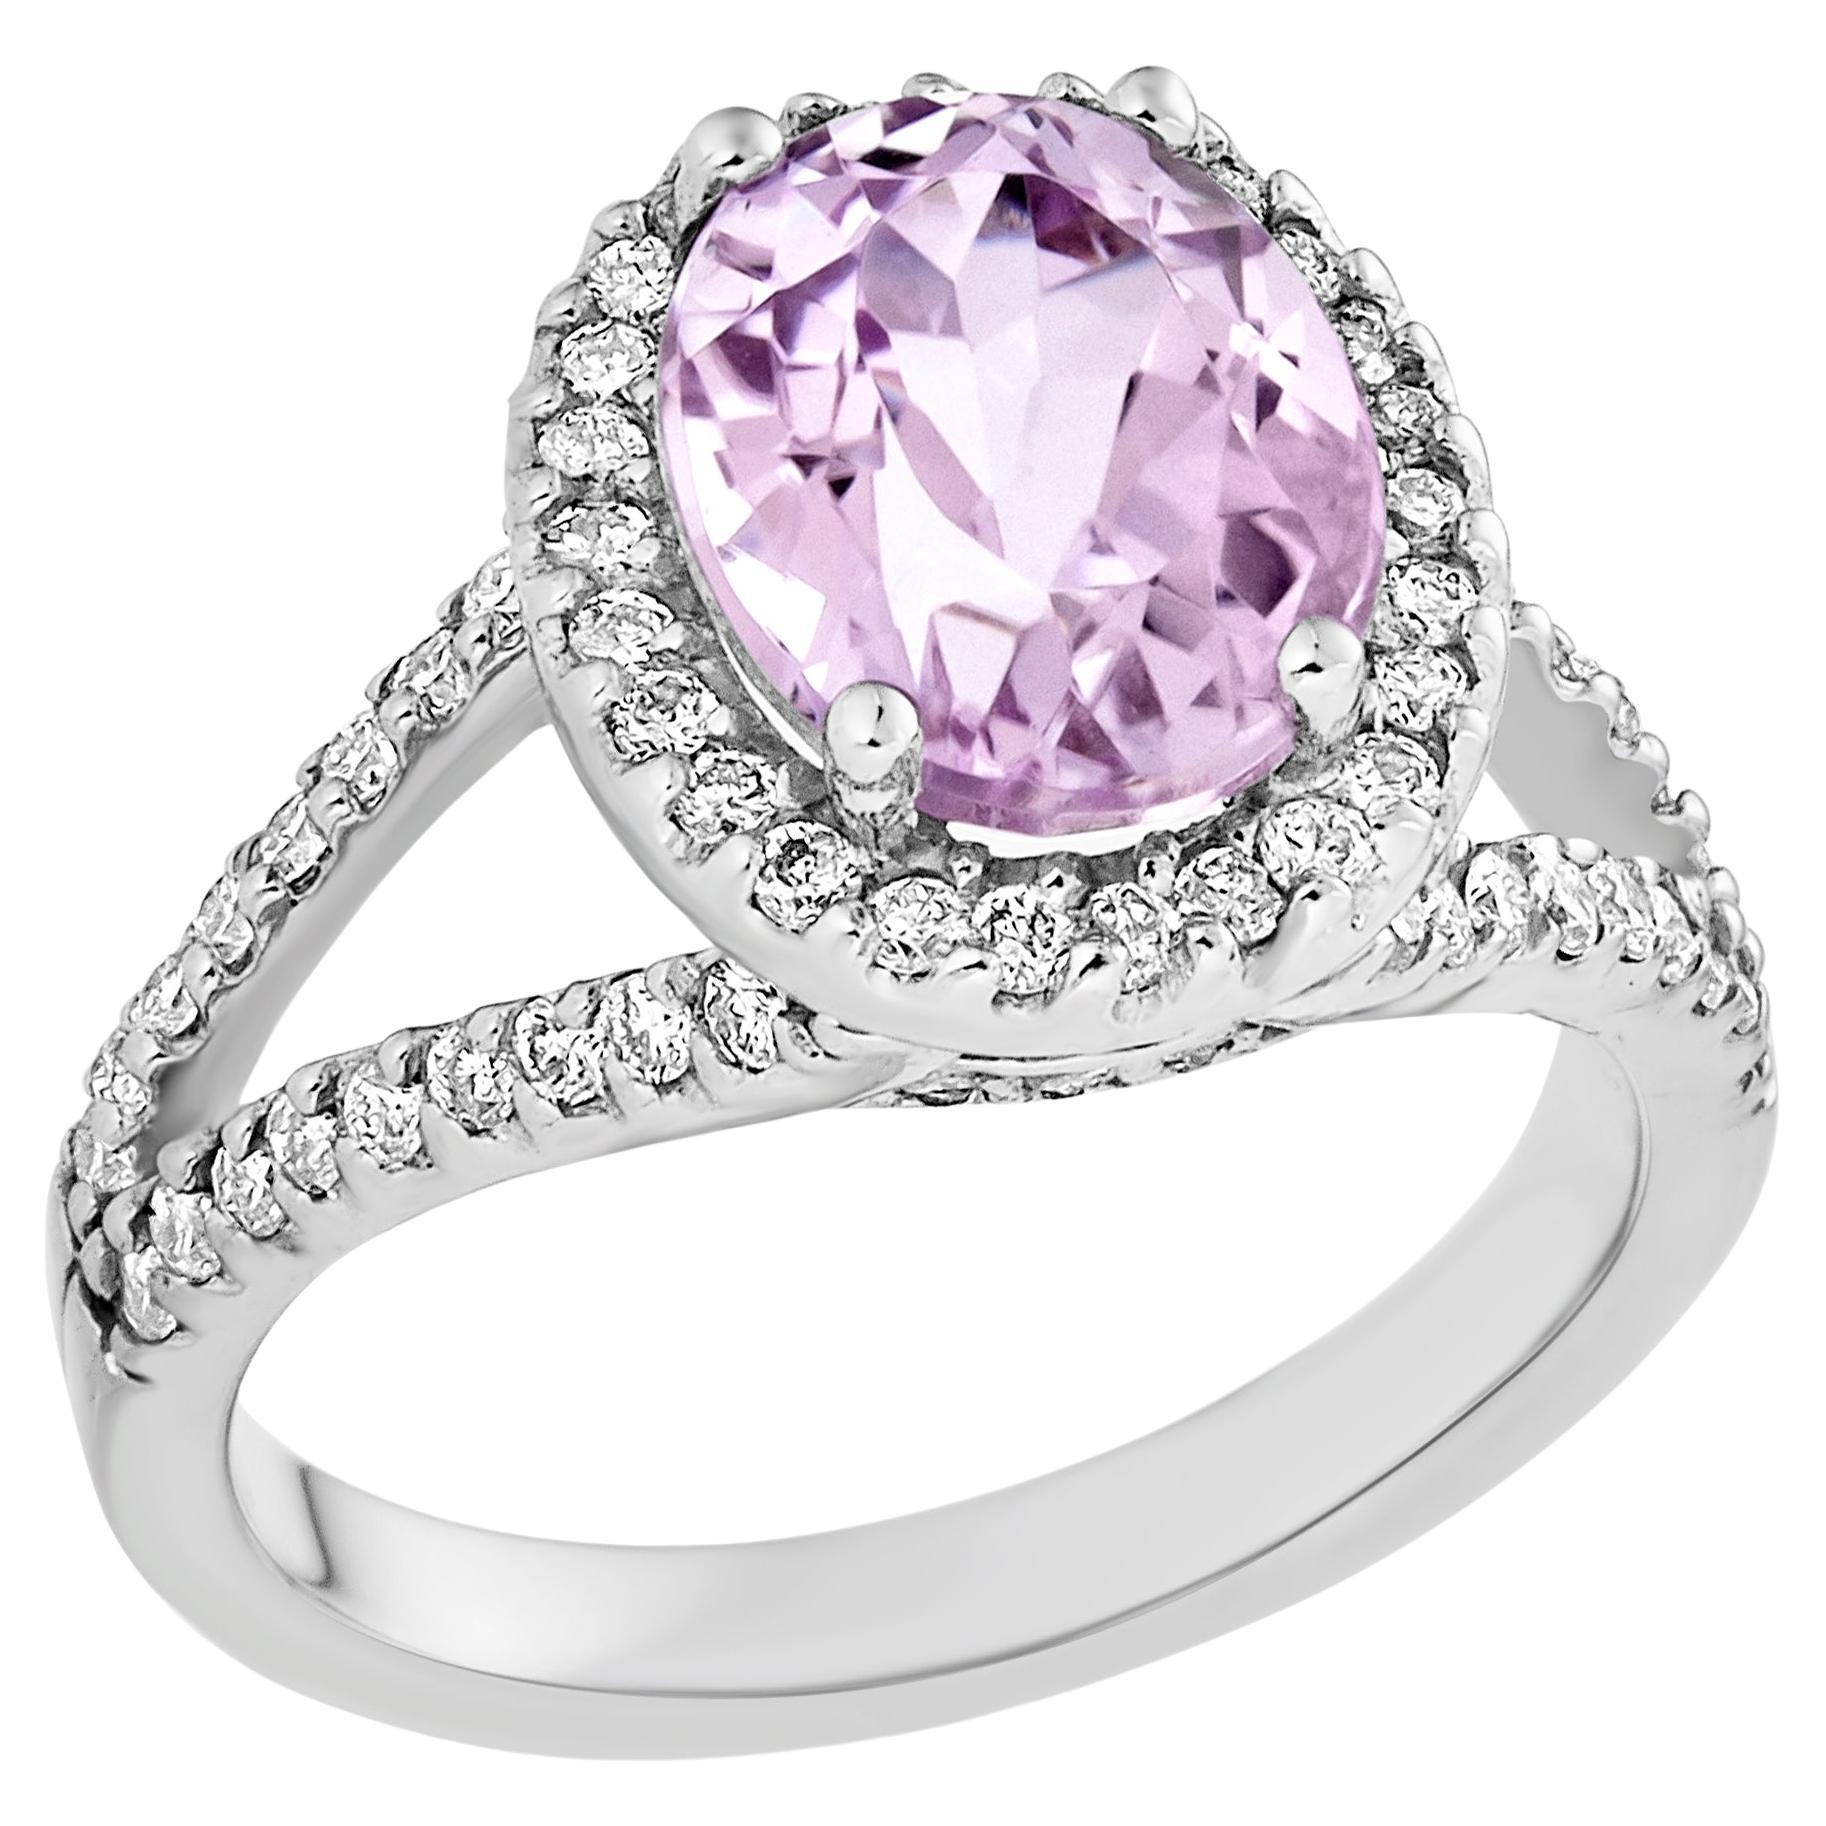 14K White Gold Ring with 68 Round 1.2mm Diamonds & Oval Pink Kunzite by Manart For Sale